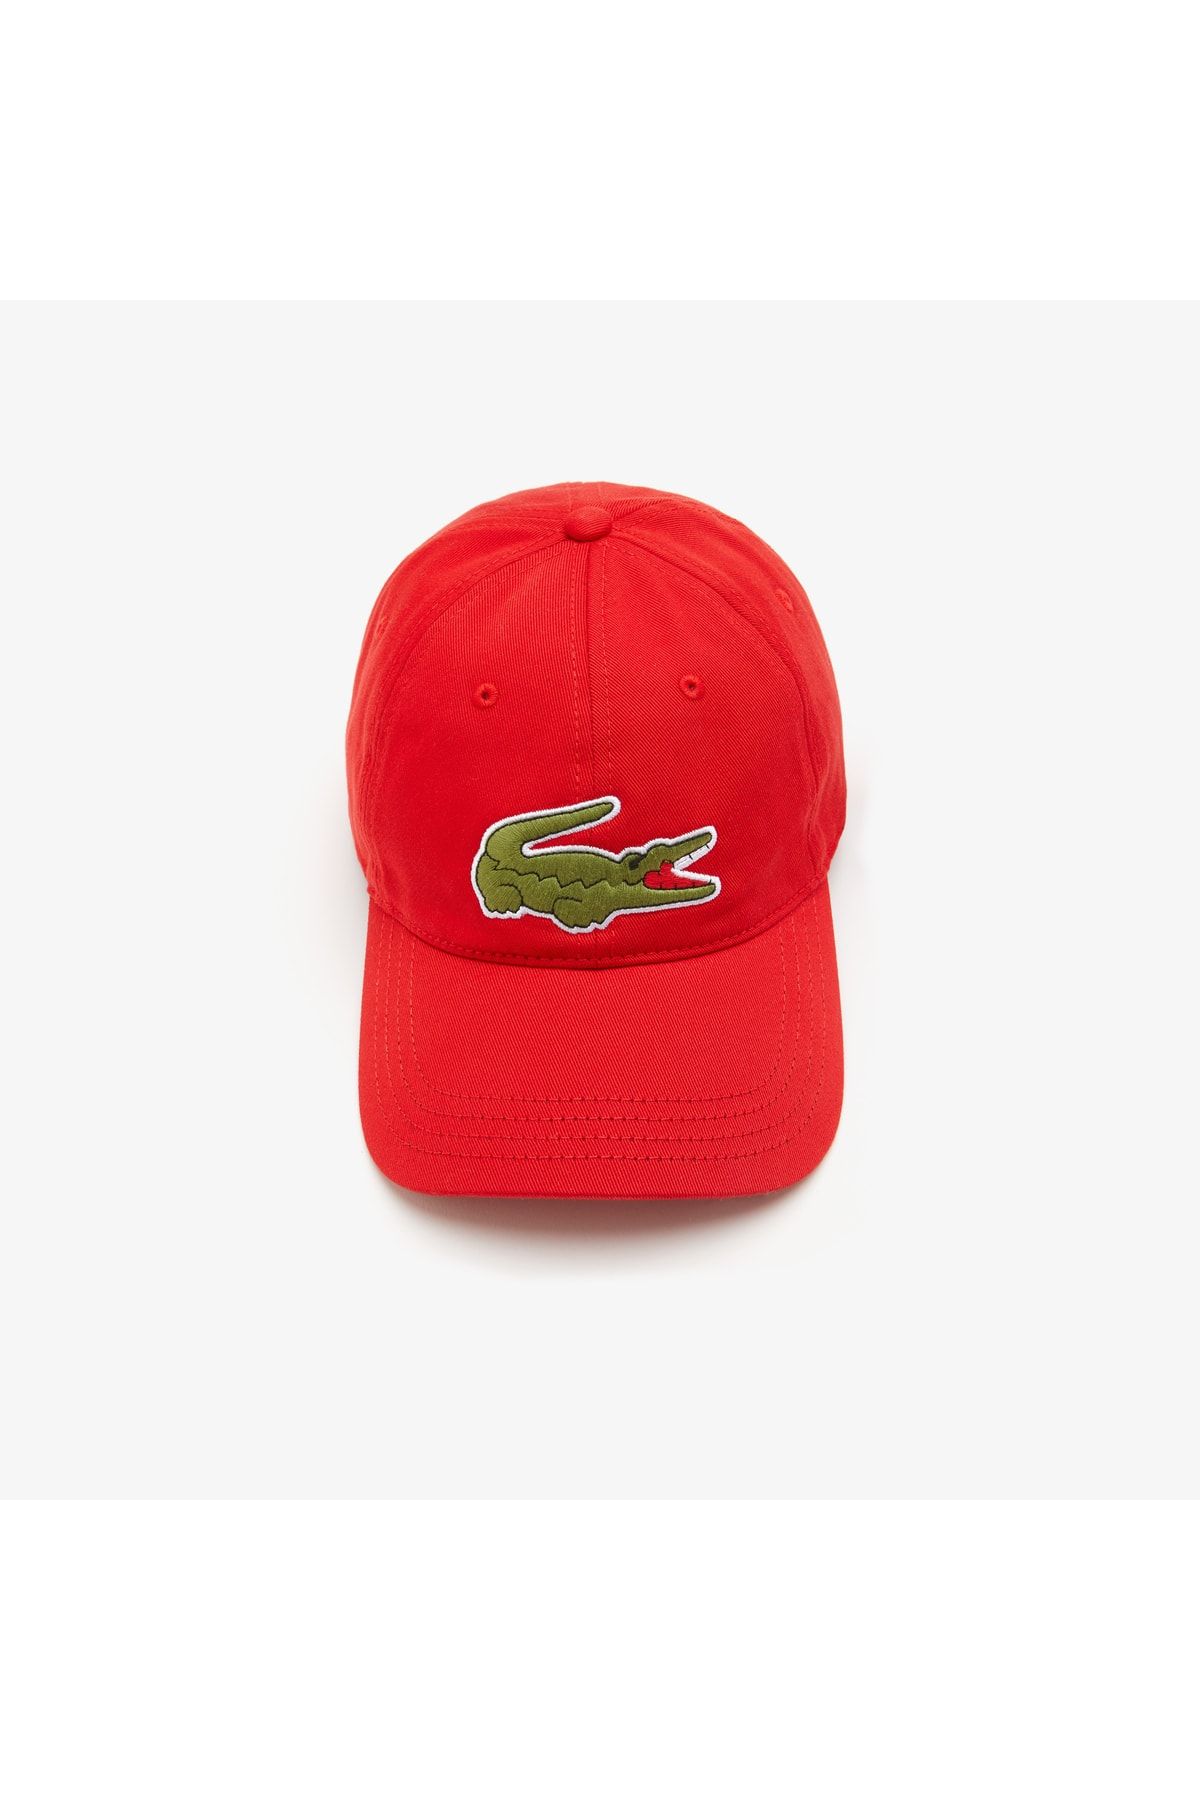 Lacoste unisex red hat